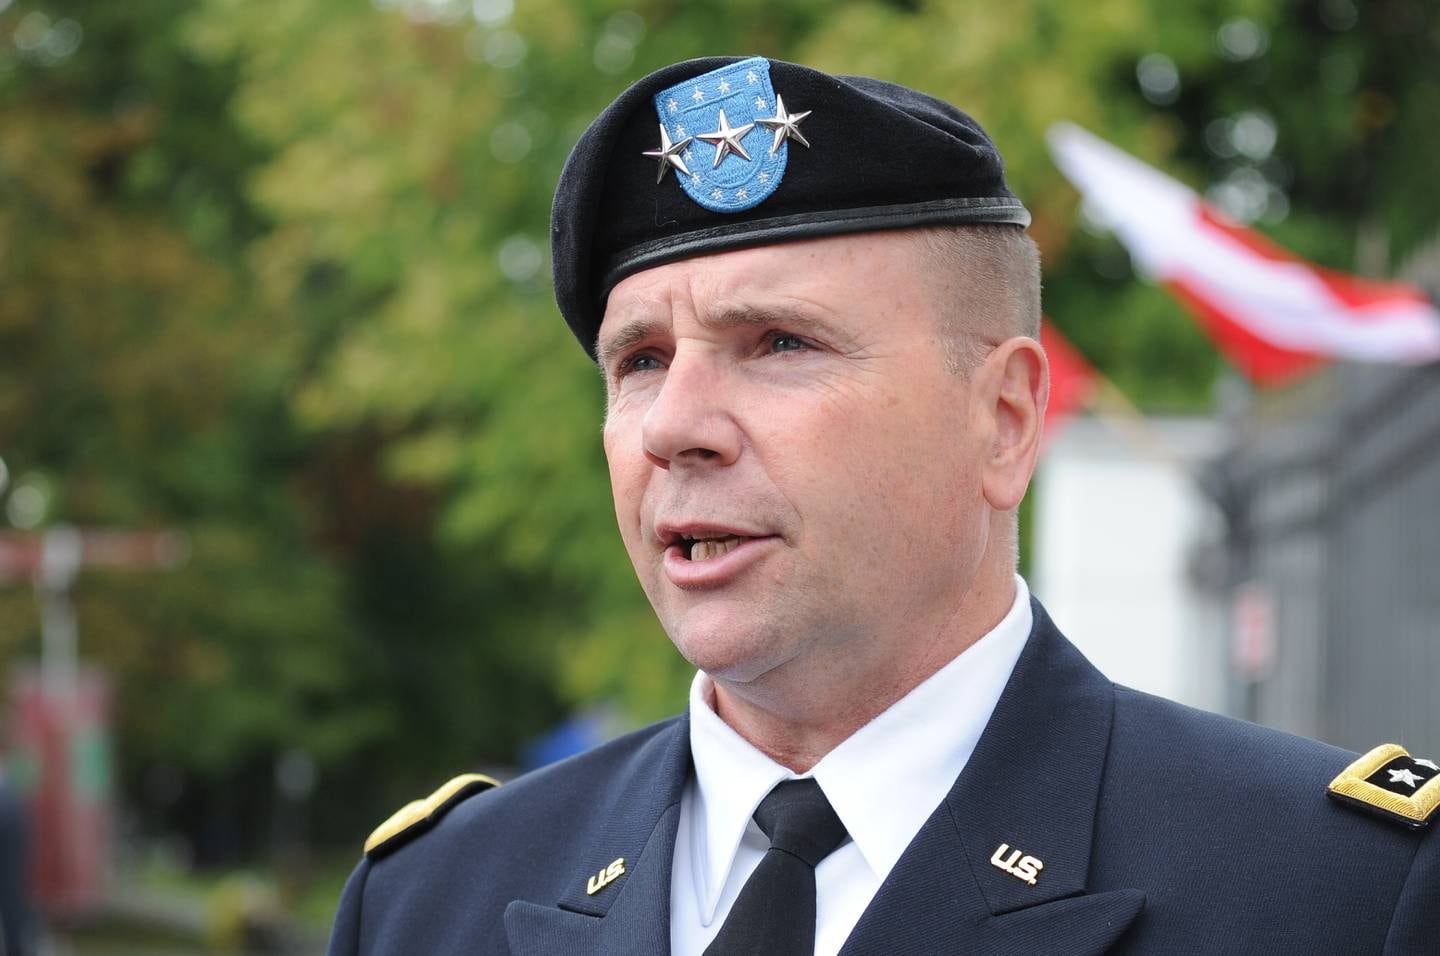 Lt. Gen. Ben Hodges, the U.S. Army commander in Europe, speaks to the press after the Polish Army Day military parade in Warsaw, Poland, Monday, Aug. 15, 2016. Hodges said the U.S. participation in Poland's armed forces national holiday underlines the increased presence that the U.S. plans in Poland and elsewhere in the region. (AP Photo/Alik Keplicz)